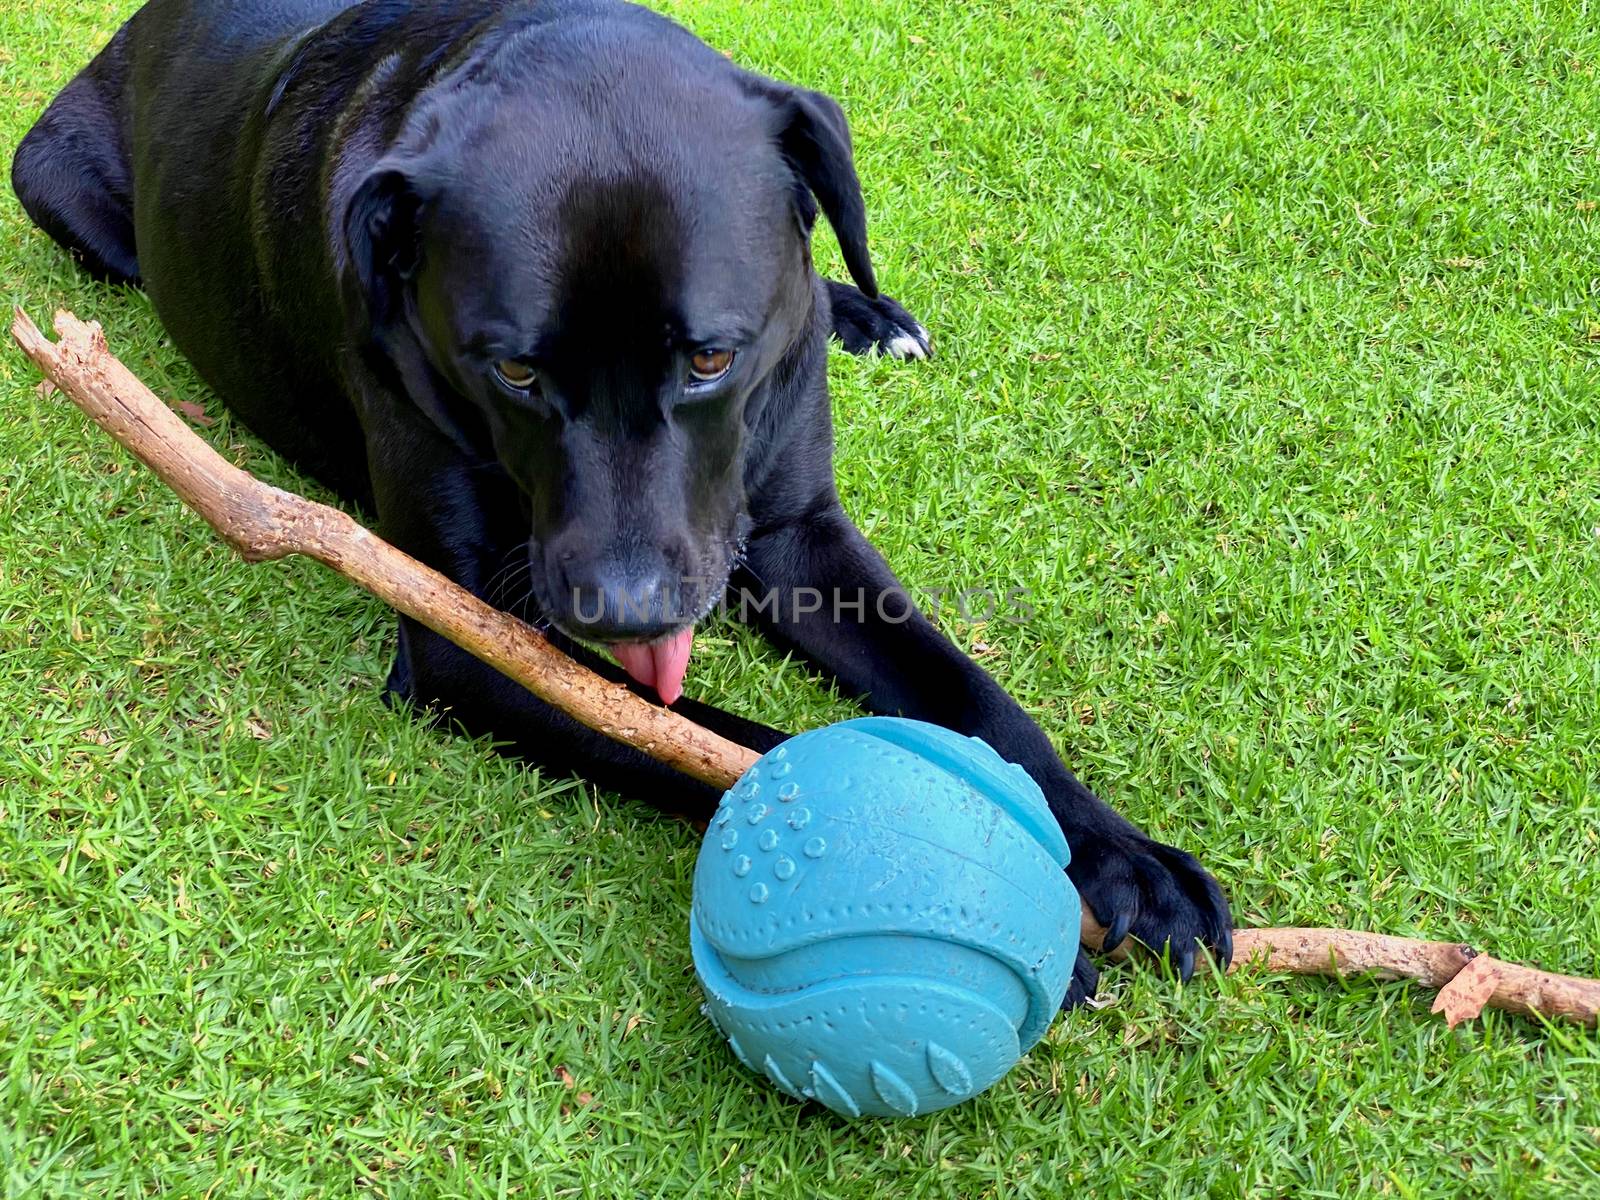 A black Labrador Retriever laying on grass holding and chewing a stick with a ball next to him.